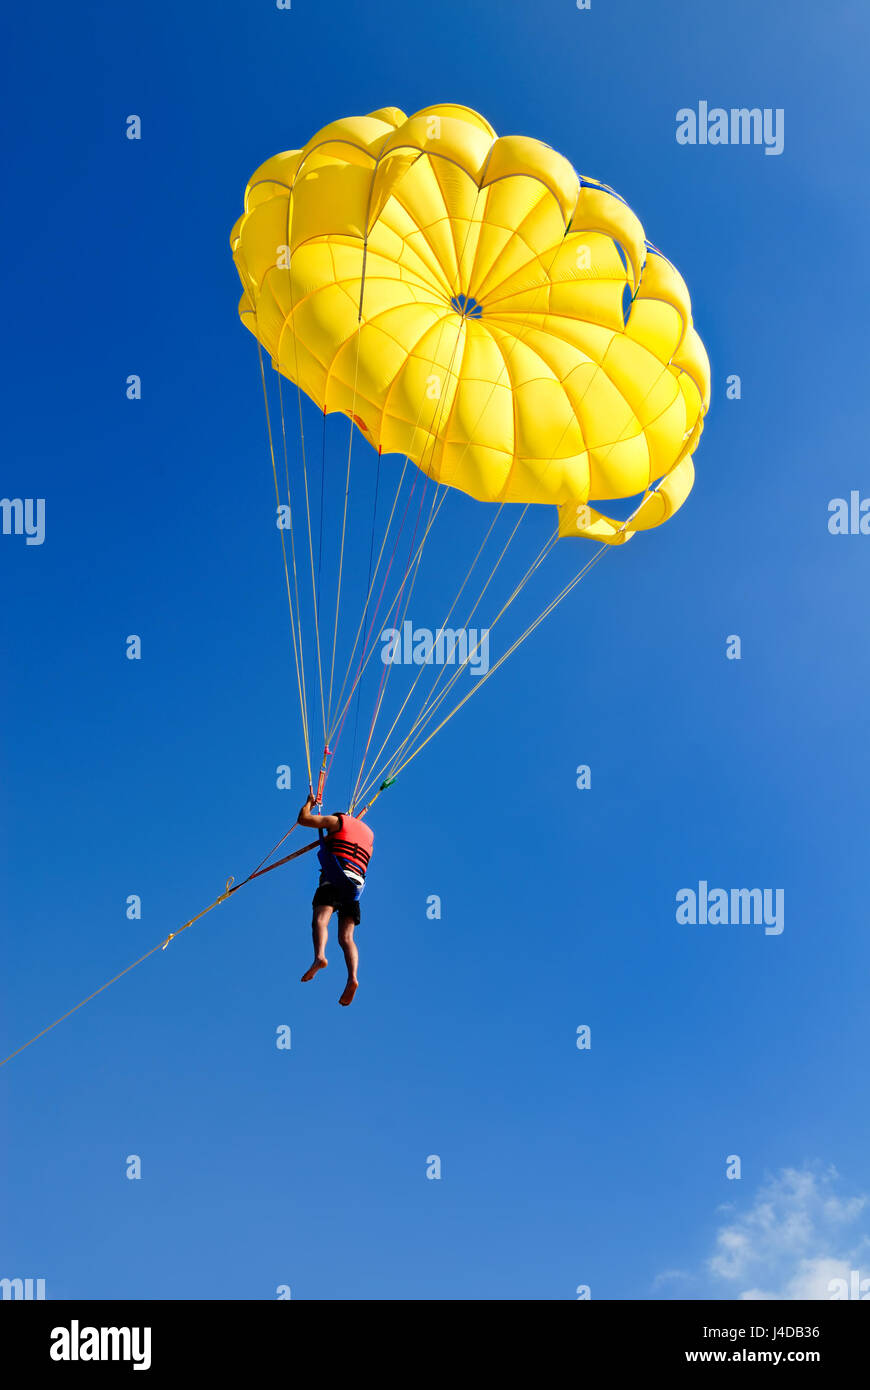 Skydiver on yellow parachute in sunny blue sky. Active lifestyle. Extreme sport. Stock Photo